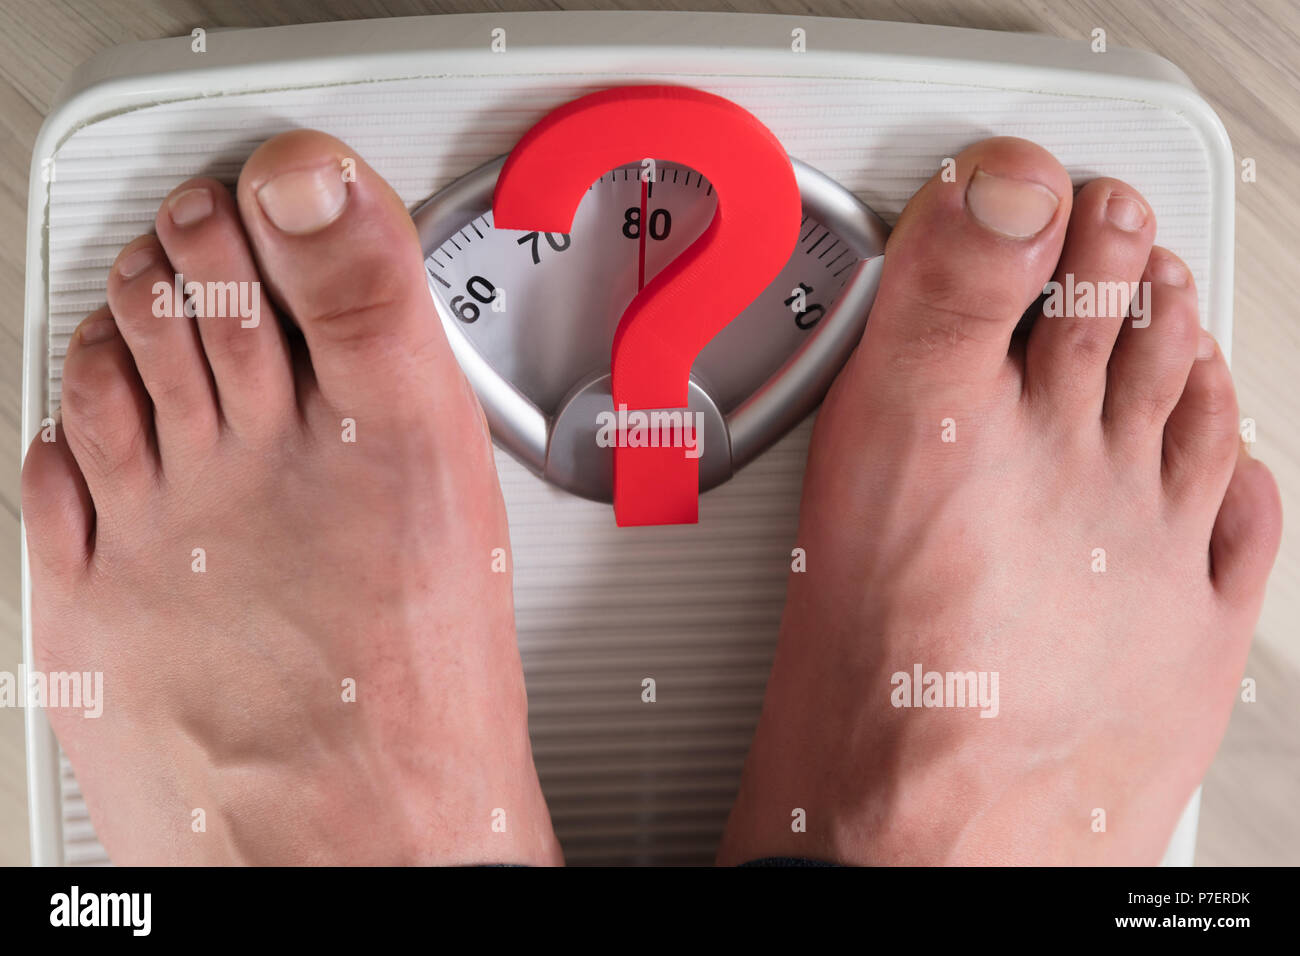 https://c8.alamy.com/comp/P7ERDK/persons-feet-standing-on-weight-scale-with-red-question-mark-sign-P7ERDK.jpg